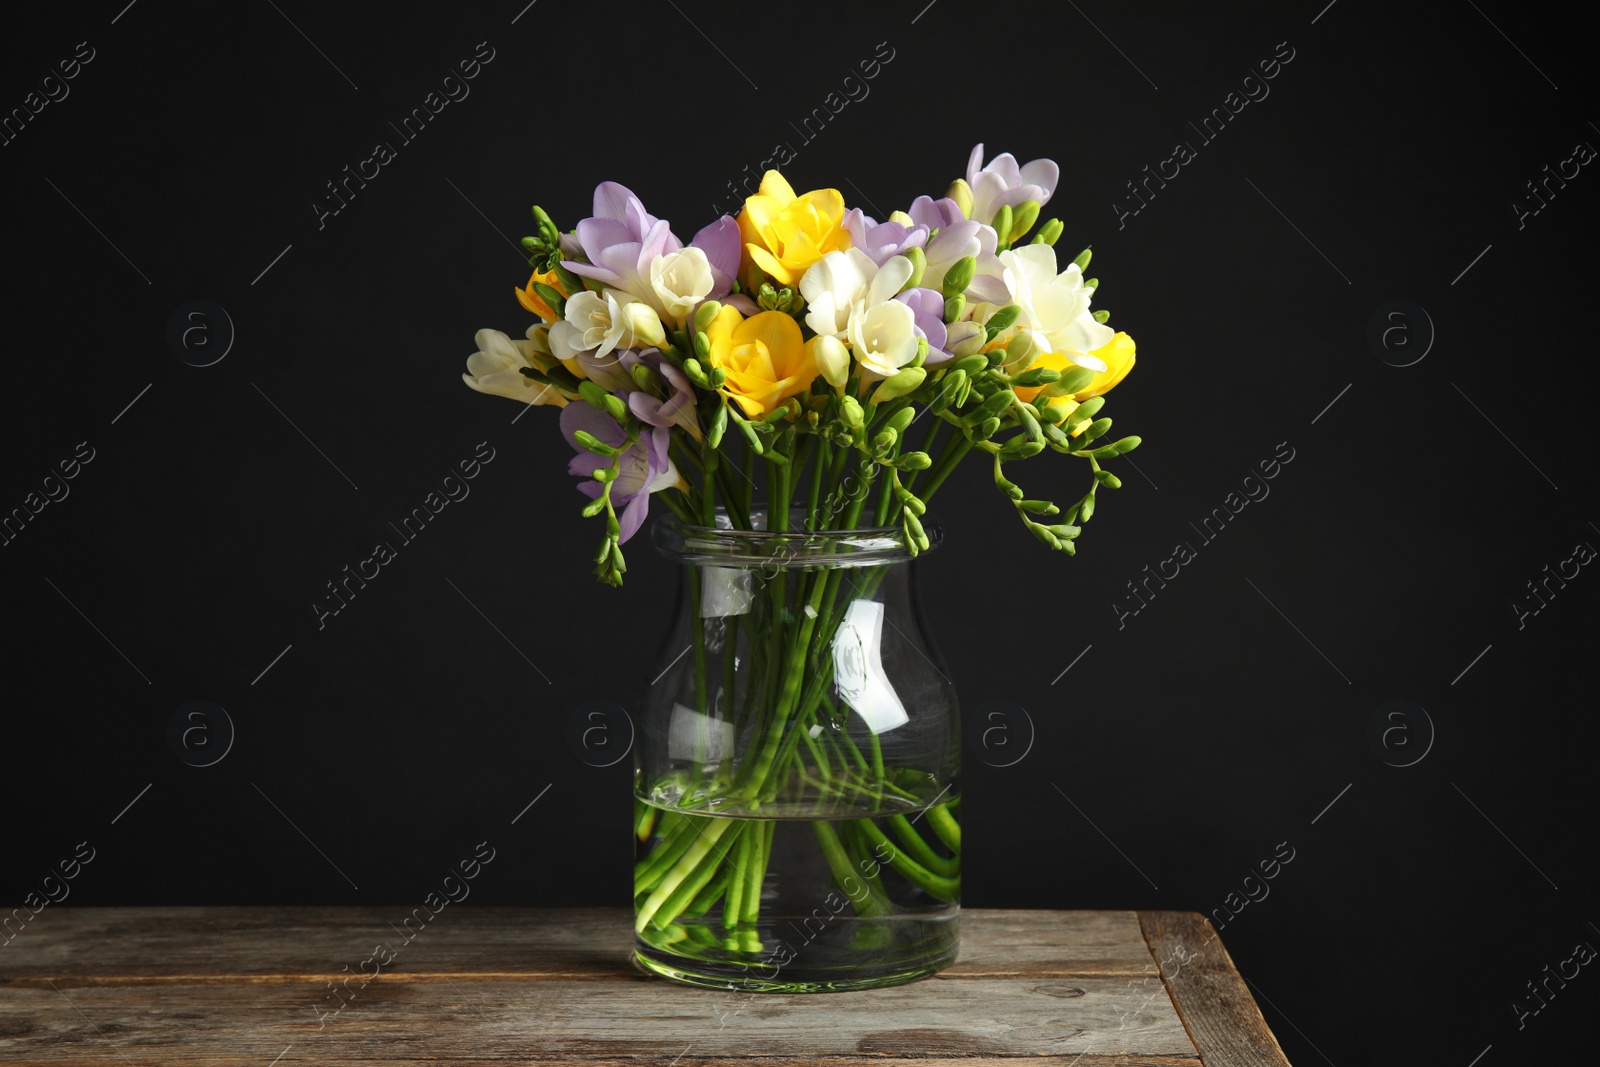 Photo of Bouquet of fresh freesia flowers in glass vase on table against black background